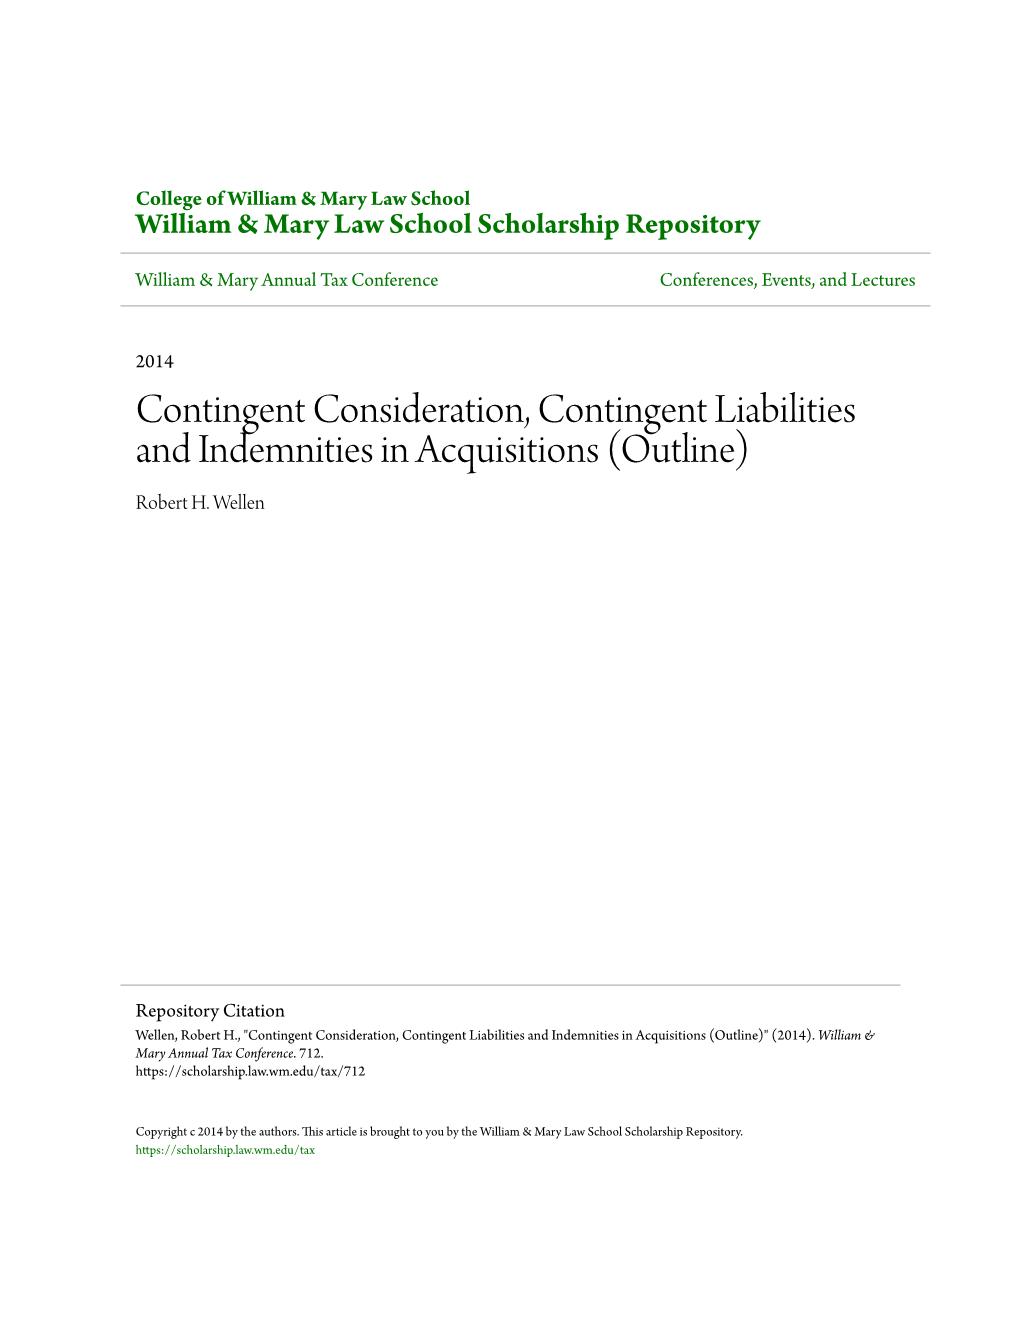 Contingent Consideration, Contingent Liabilities and Indemnities in Acquisitions (Outline) Robert H